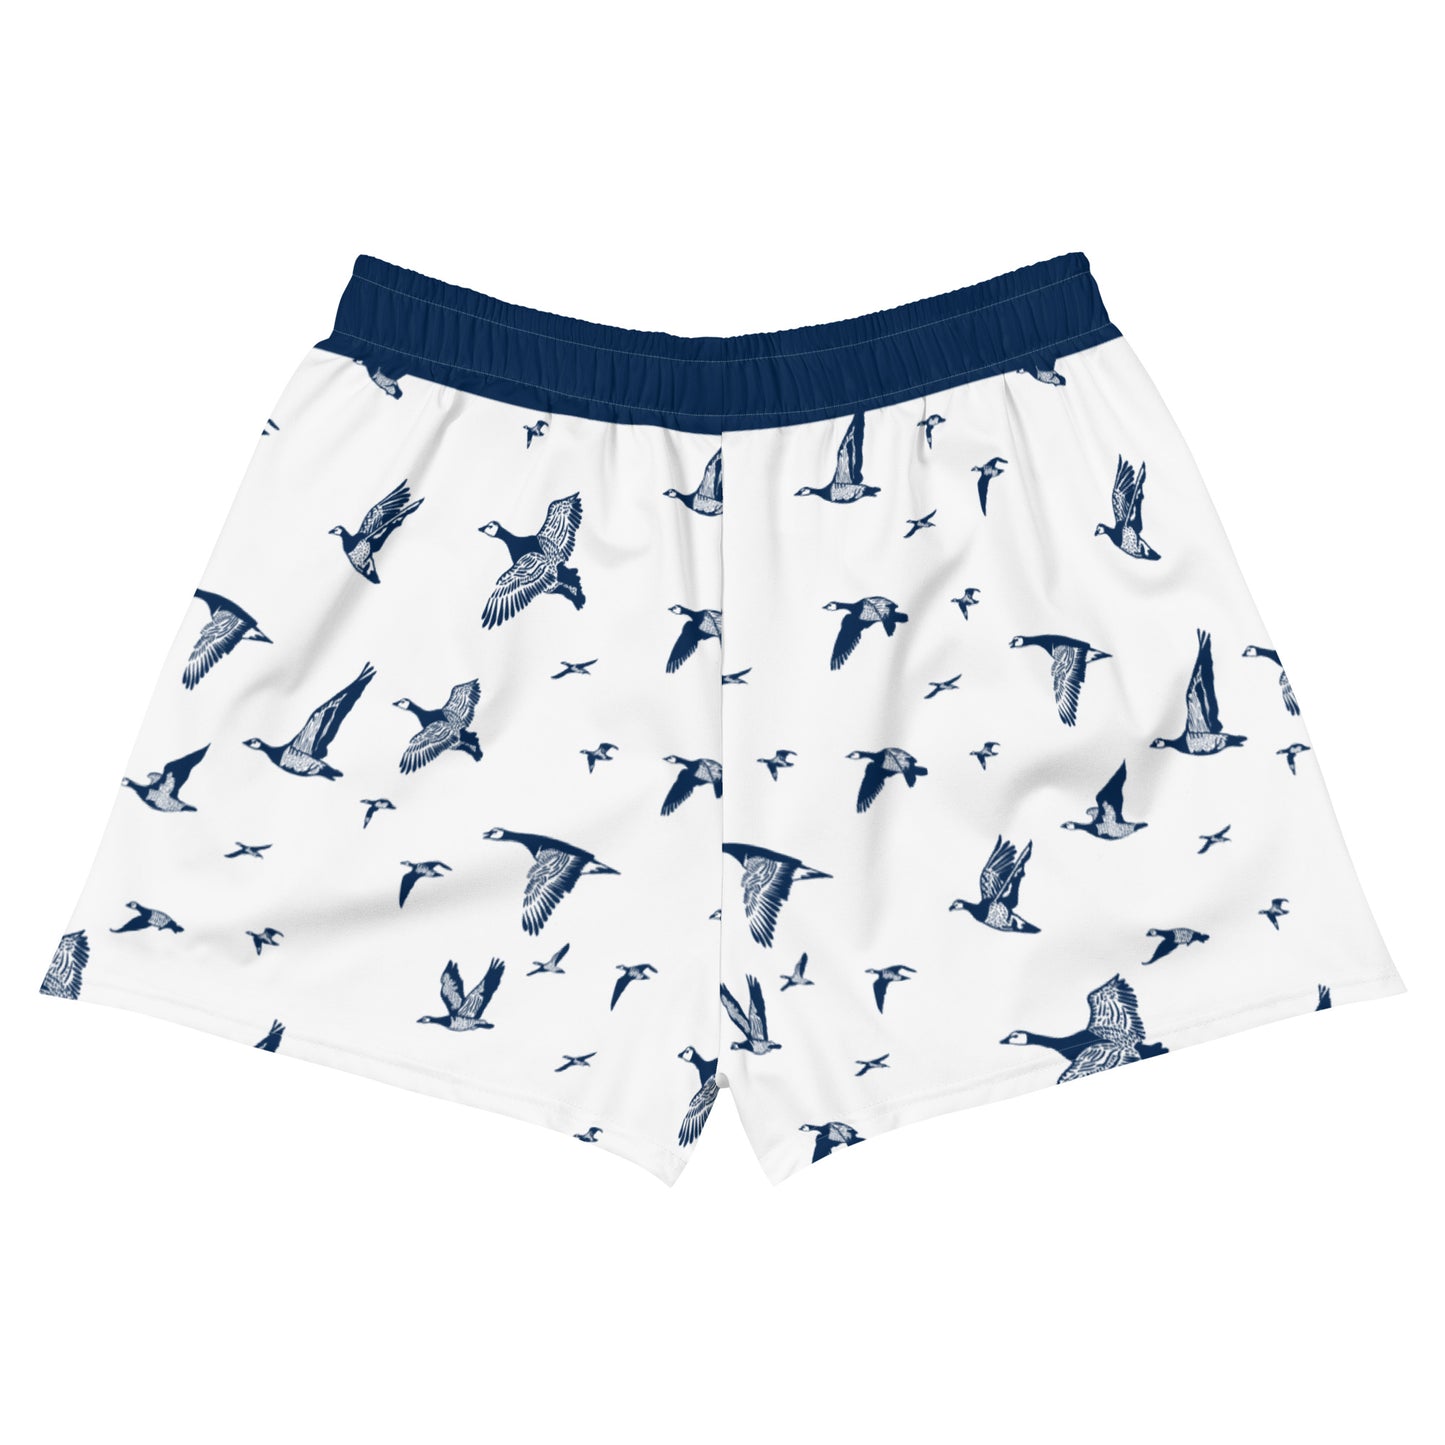 Oh my geese - Women's Athletic Short Shorts - Shorts- Print N Stuff - [designed in Turku FInland]